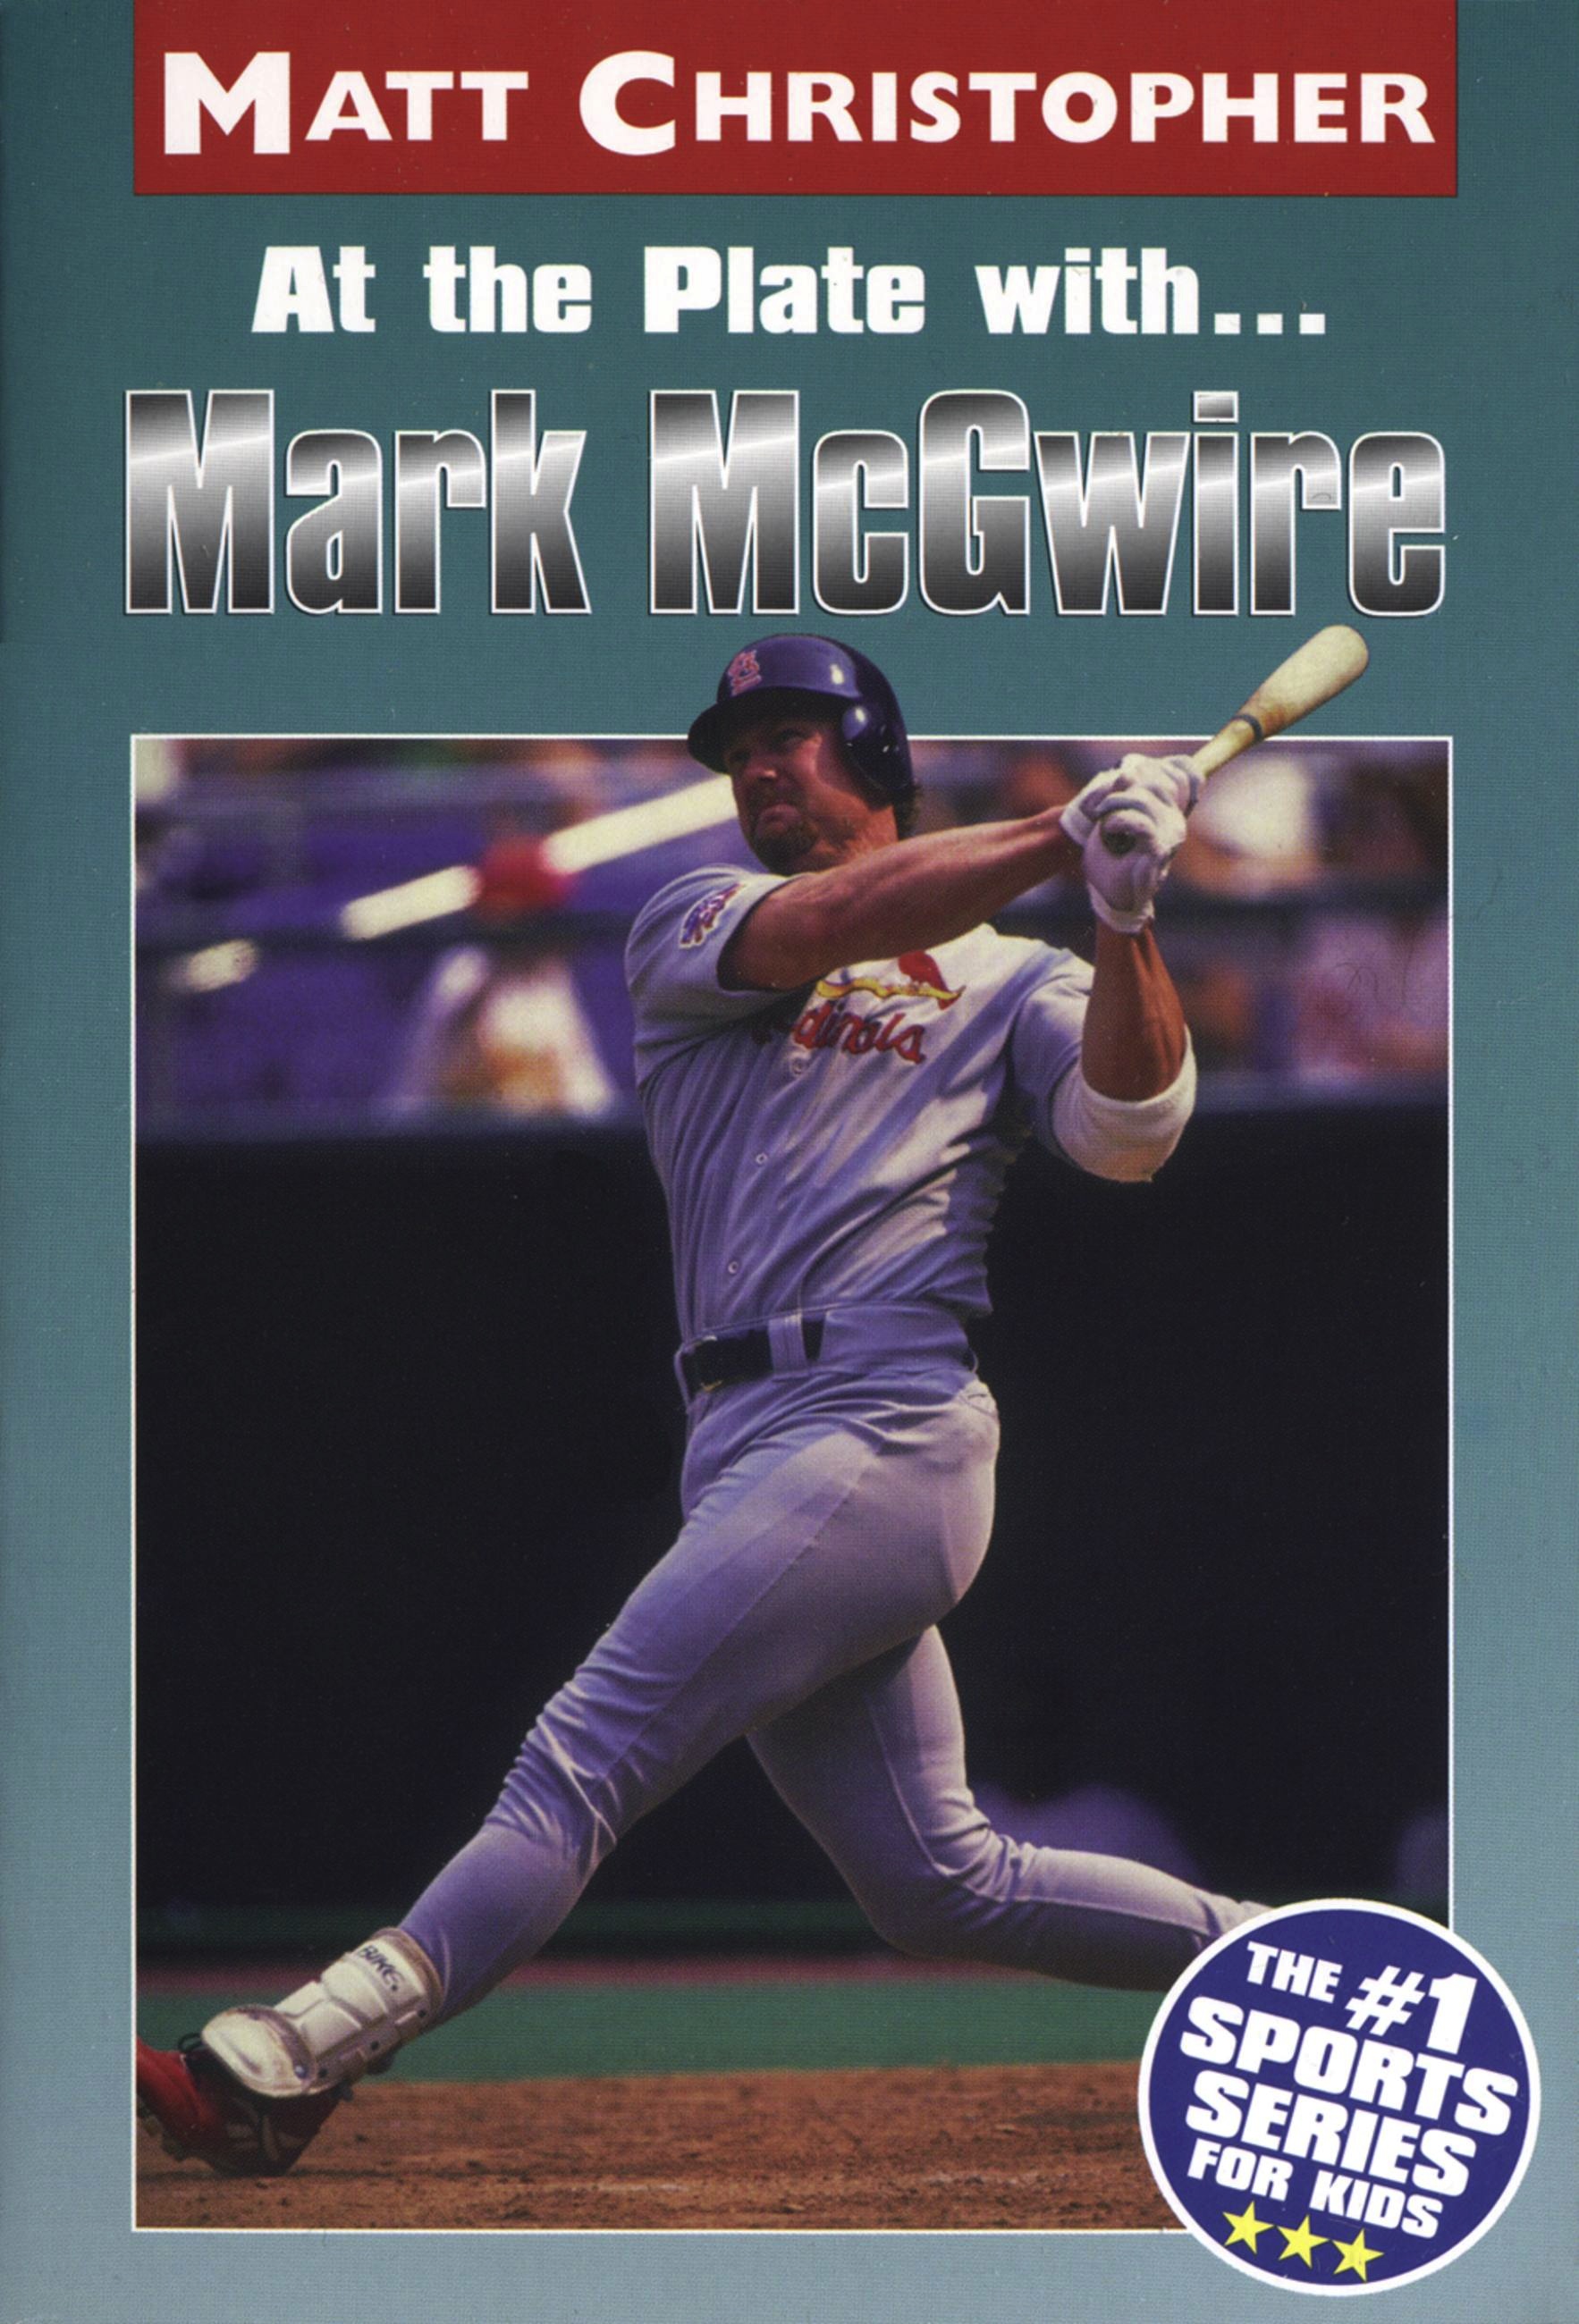 At the Plate withMarc McGwire by Matt Christopher